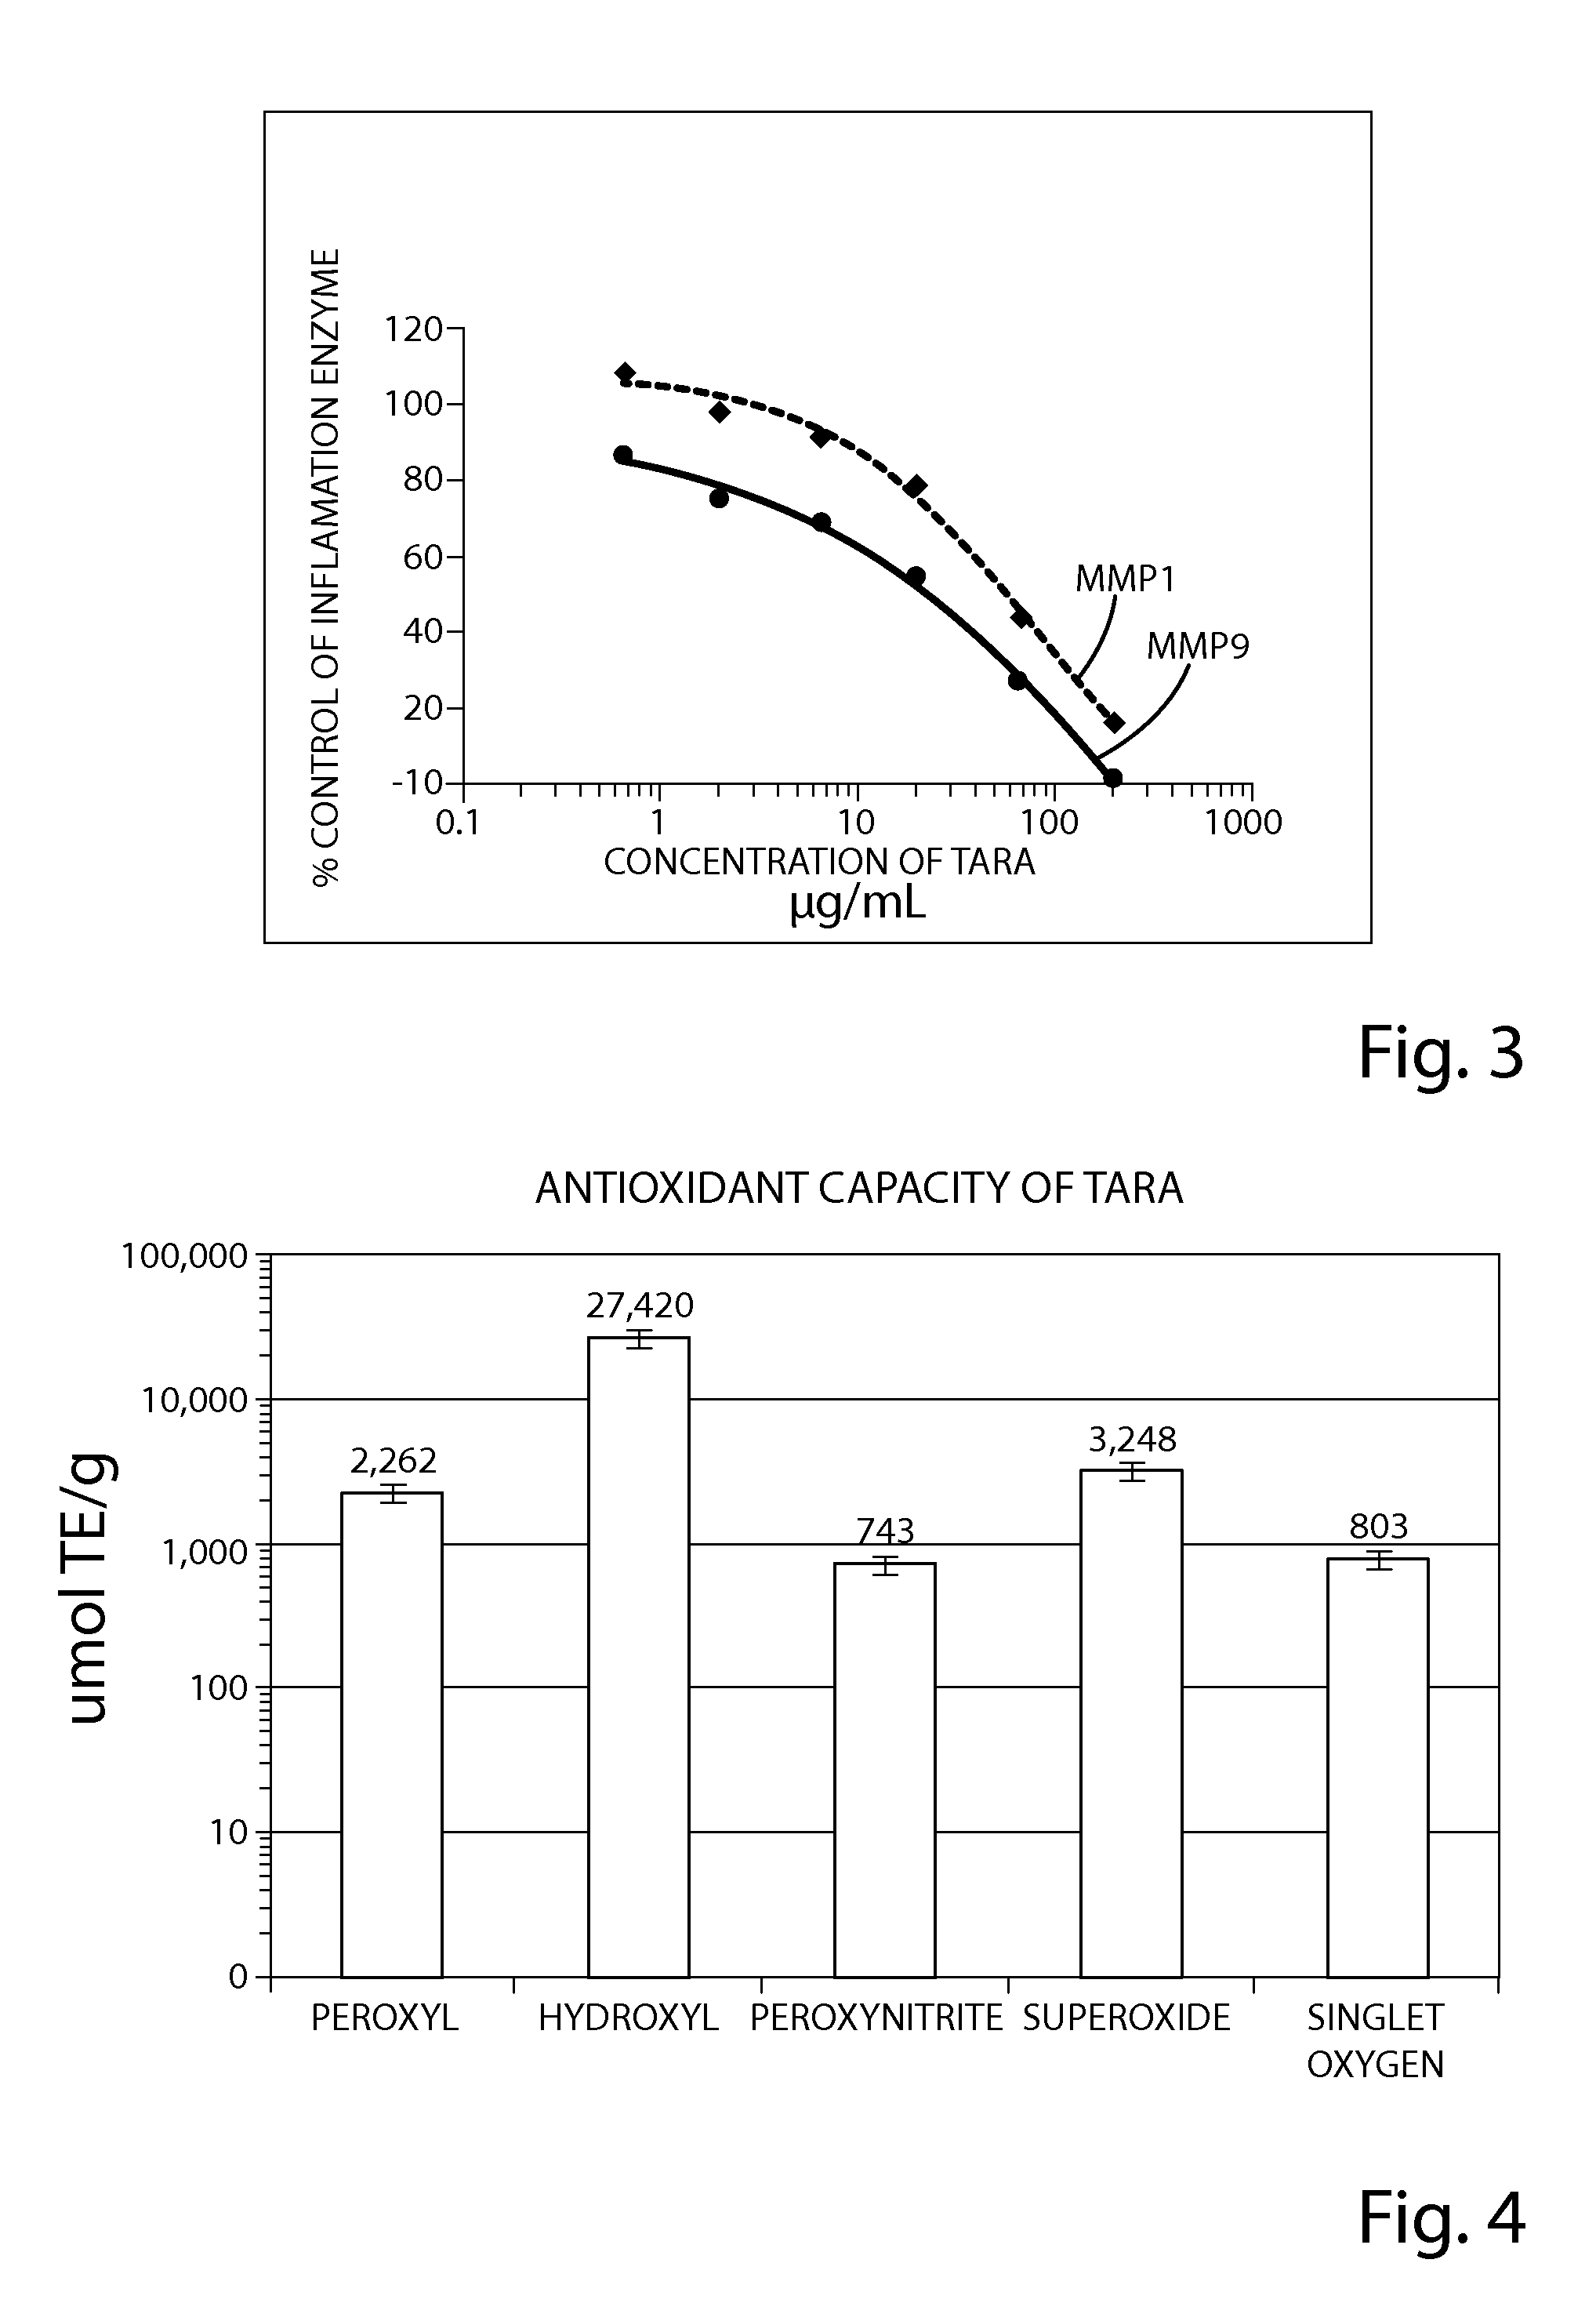 Anti-inflammatory and antioxidant composition and related method of use